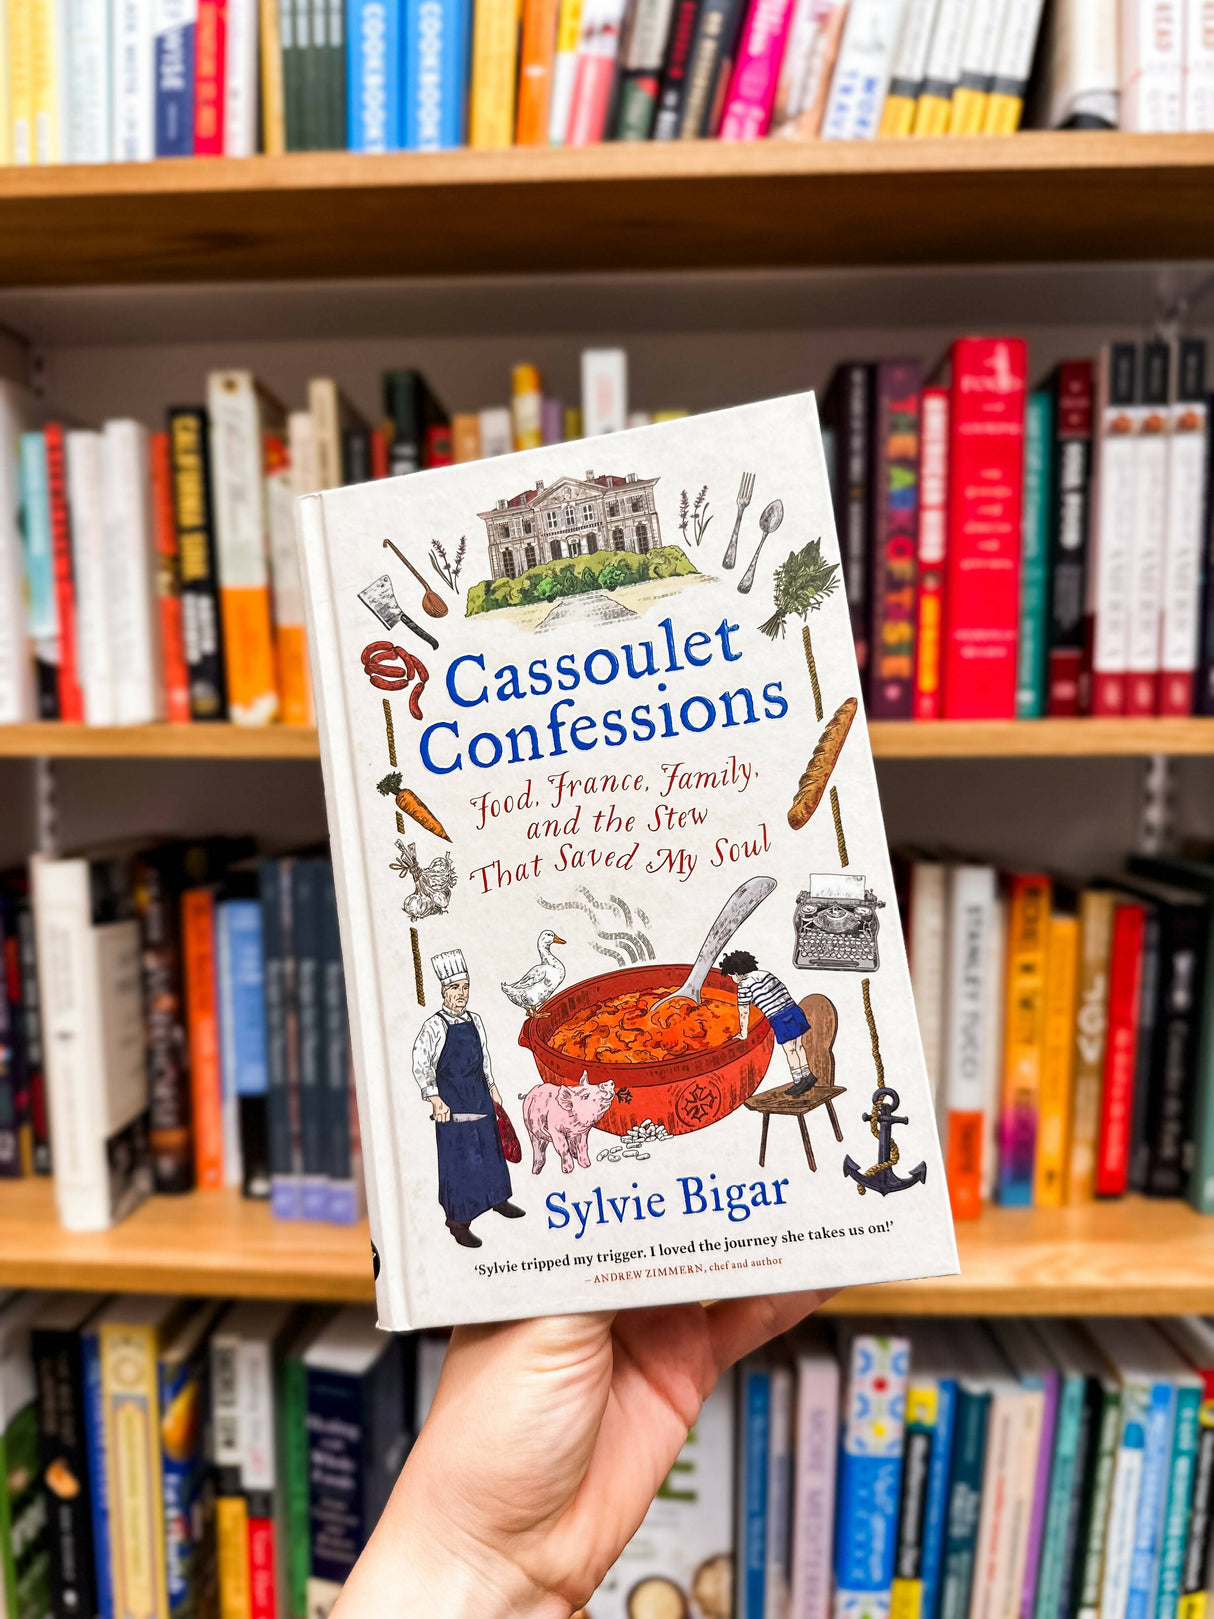 Cassoulet Confessions: Food, France, Family and the Stew That Saved My Soul